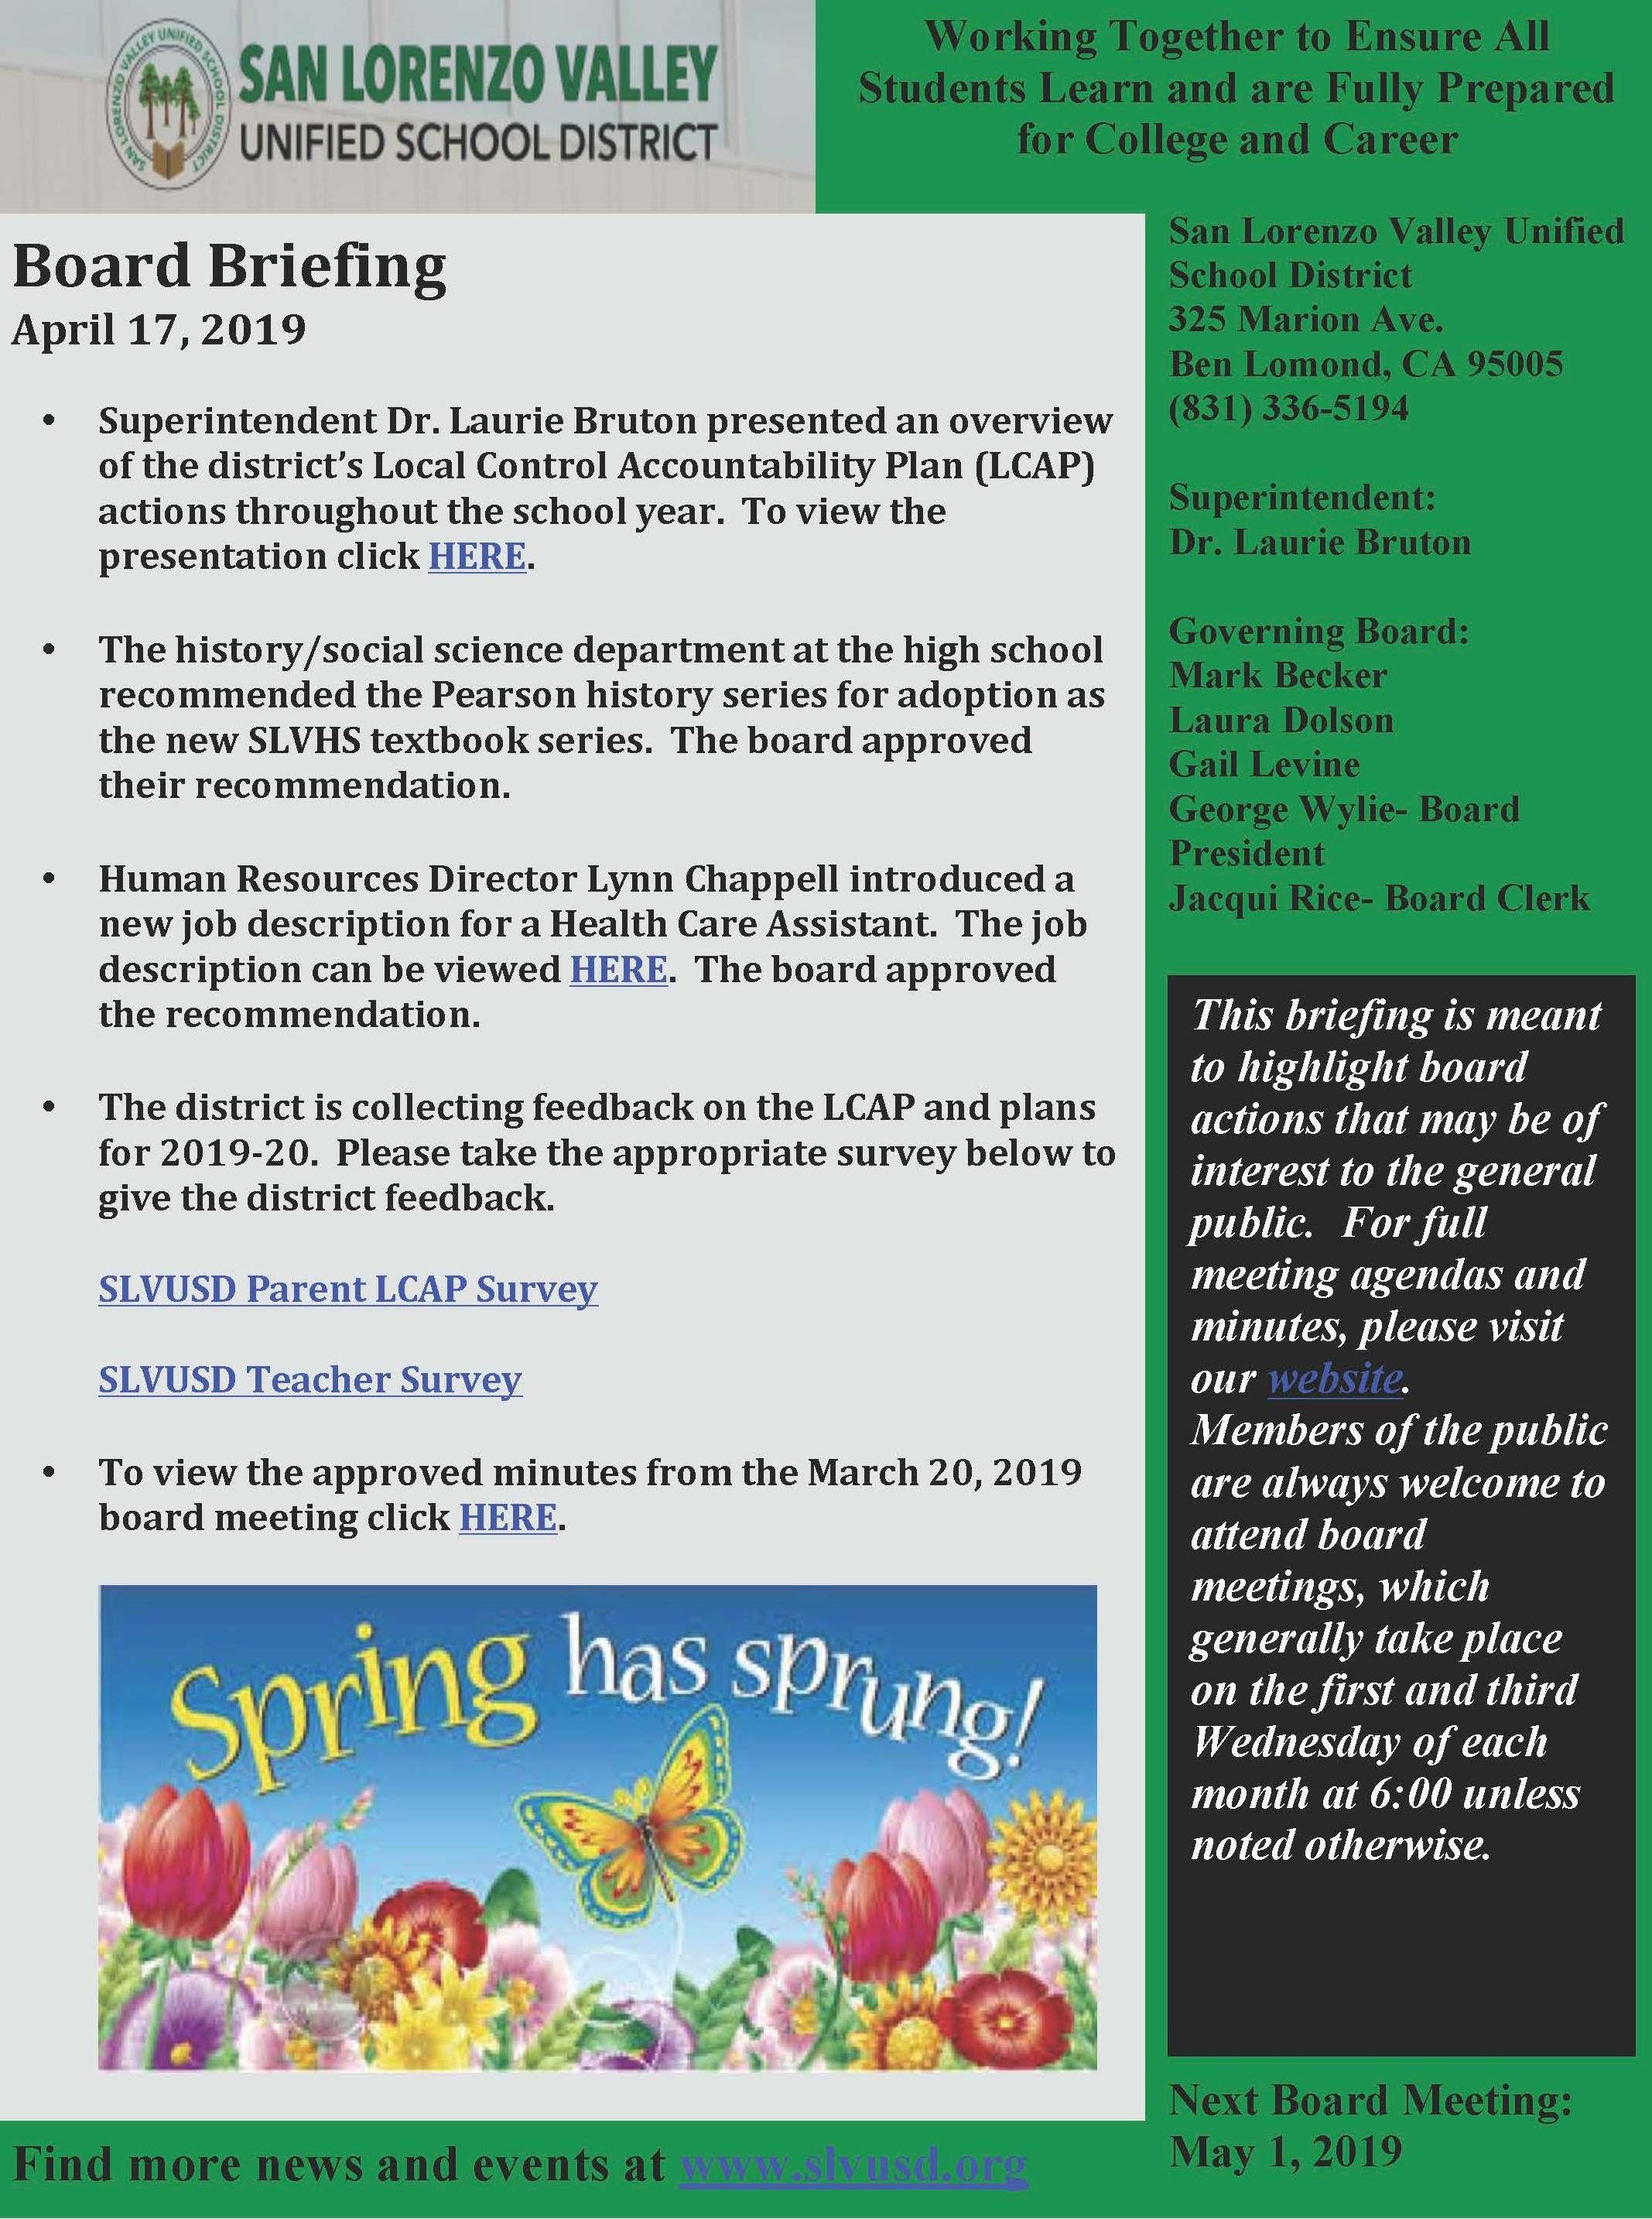 board briefing april 17, 2019 call 336 5194 for details